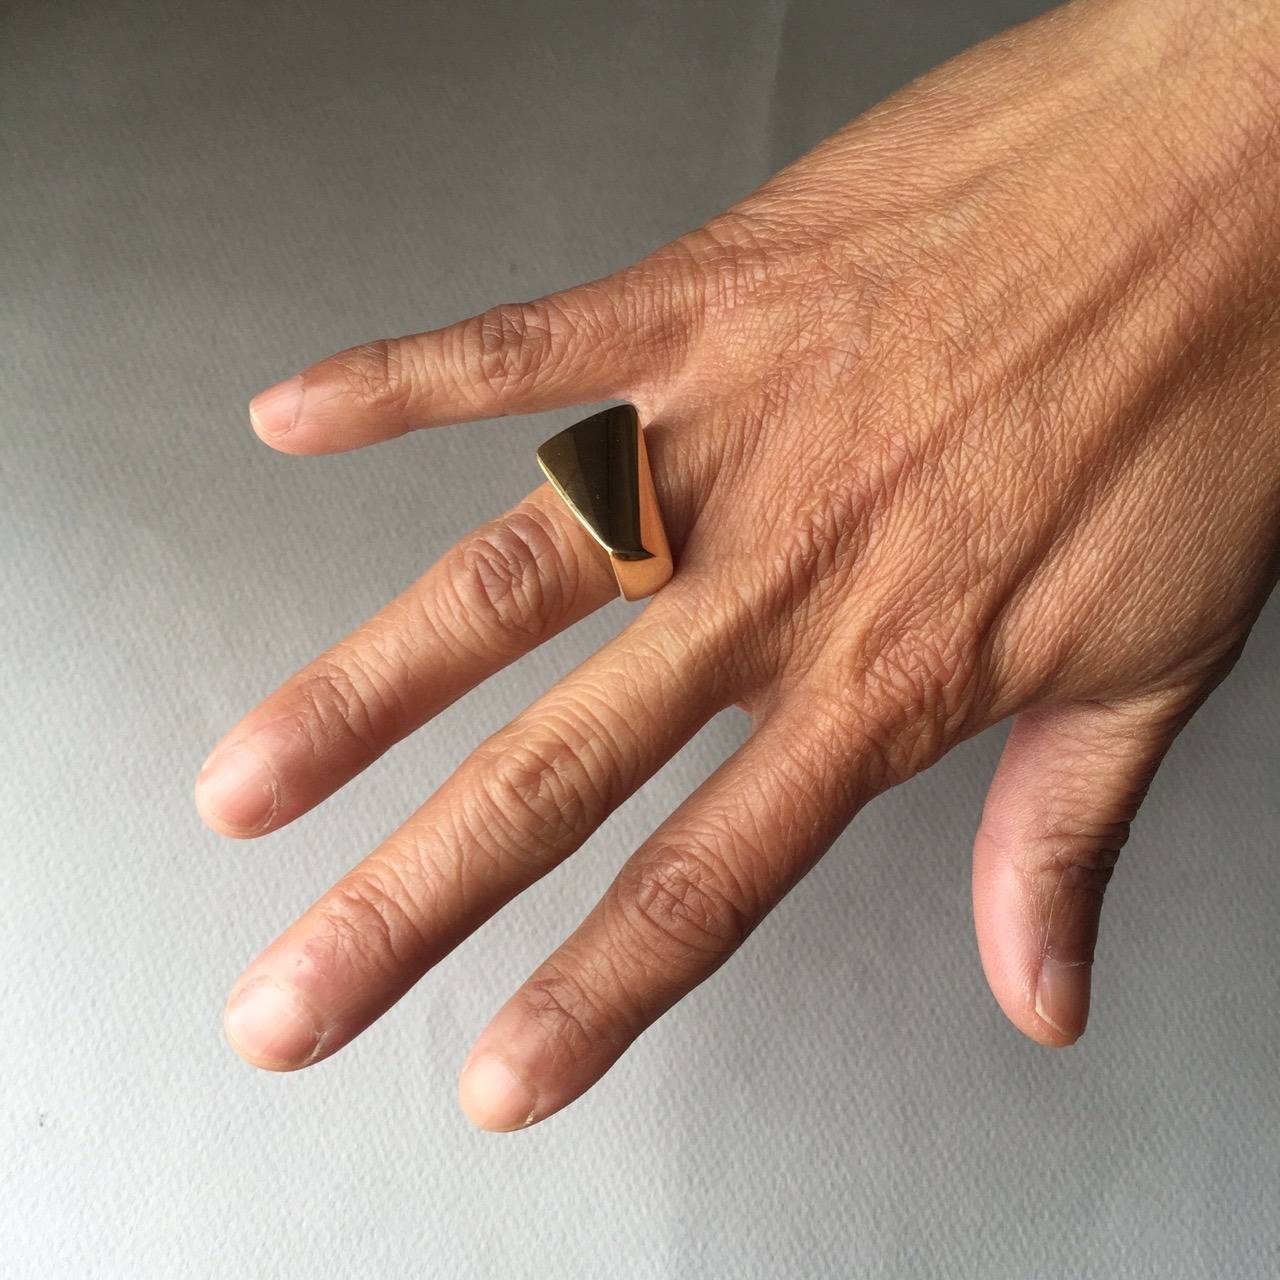 Georg Jensen Modernist Ring in solid 18k Gold.
designed by Henning Koppel, no. 1141.

Size 5. Very heavy, Excellent condition. Approximately 17 grams.

Henning Koppel (1918 - 1981) was educated as a sculptor and designer at the Royal Danish